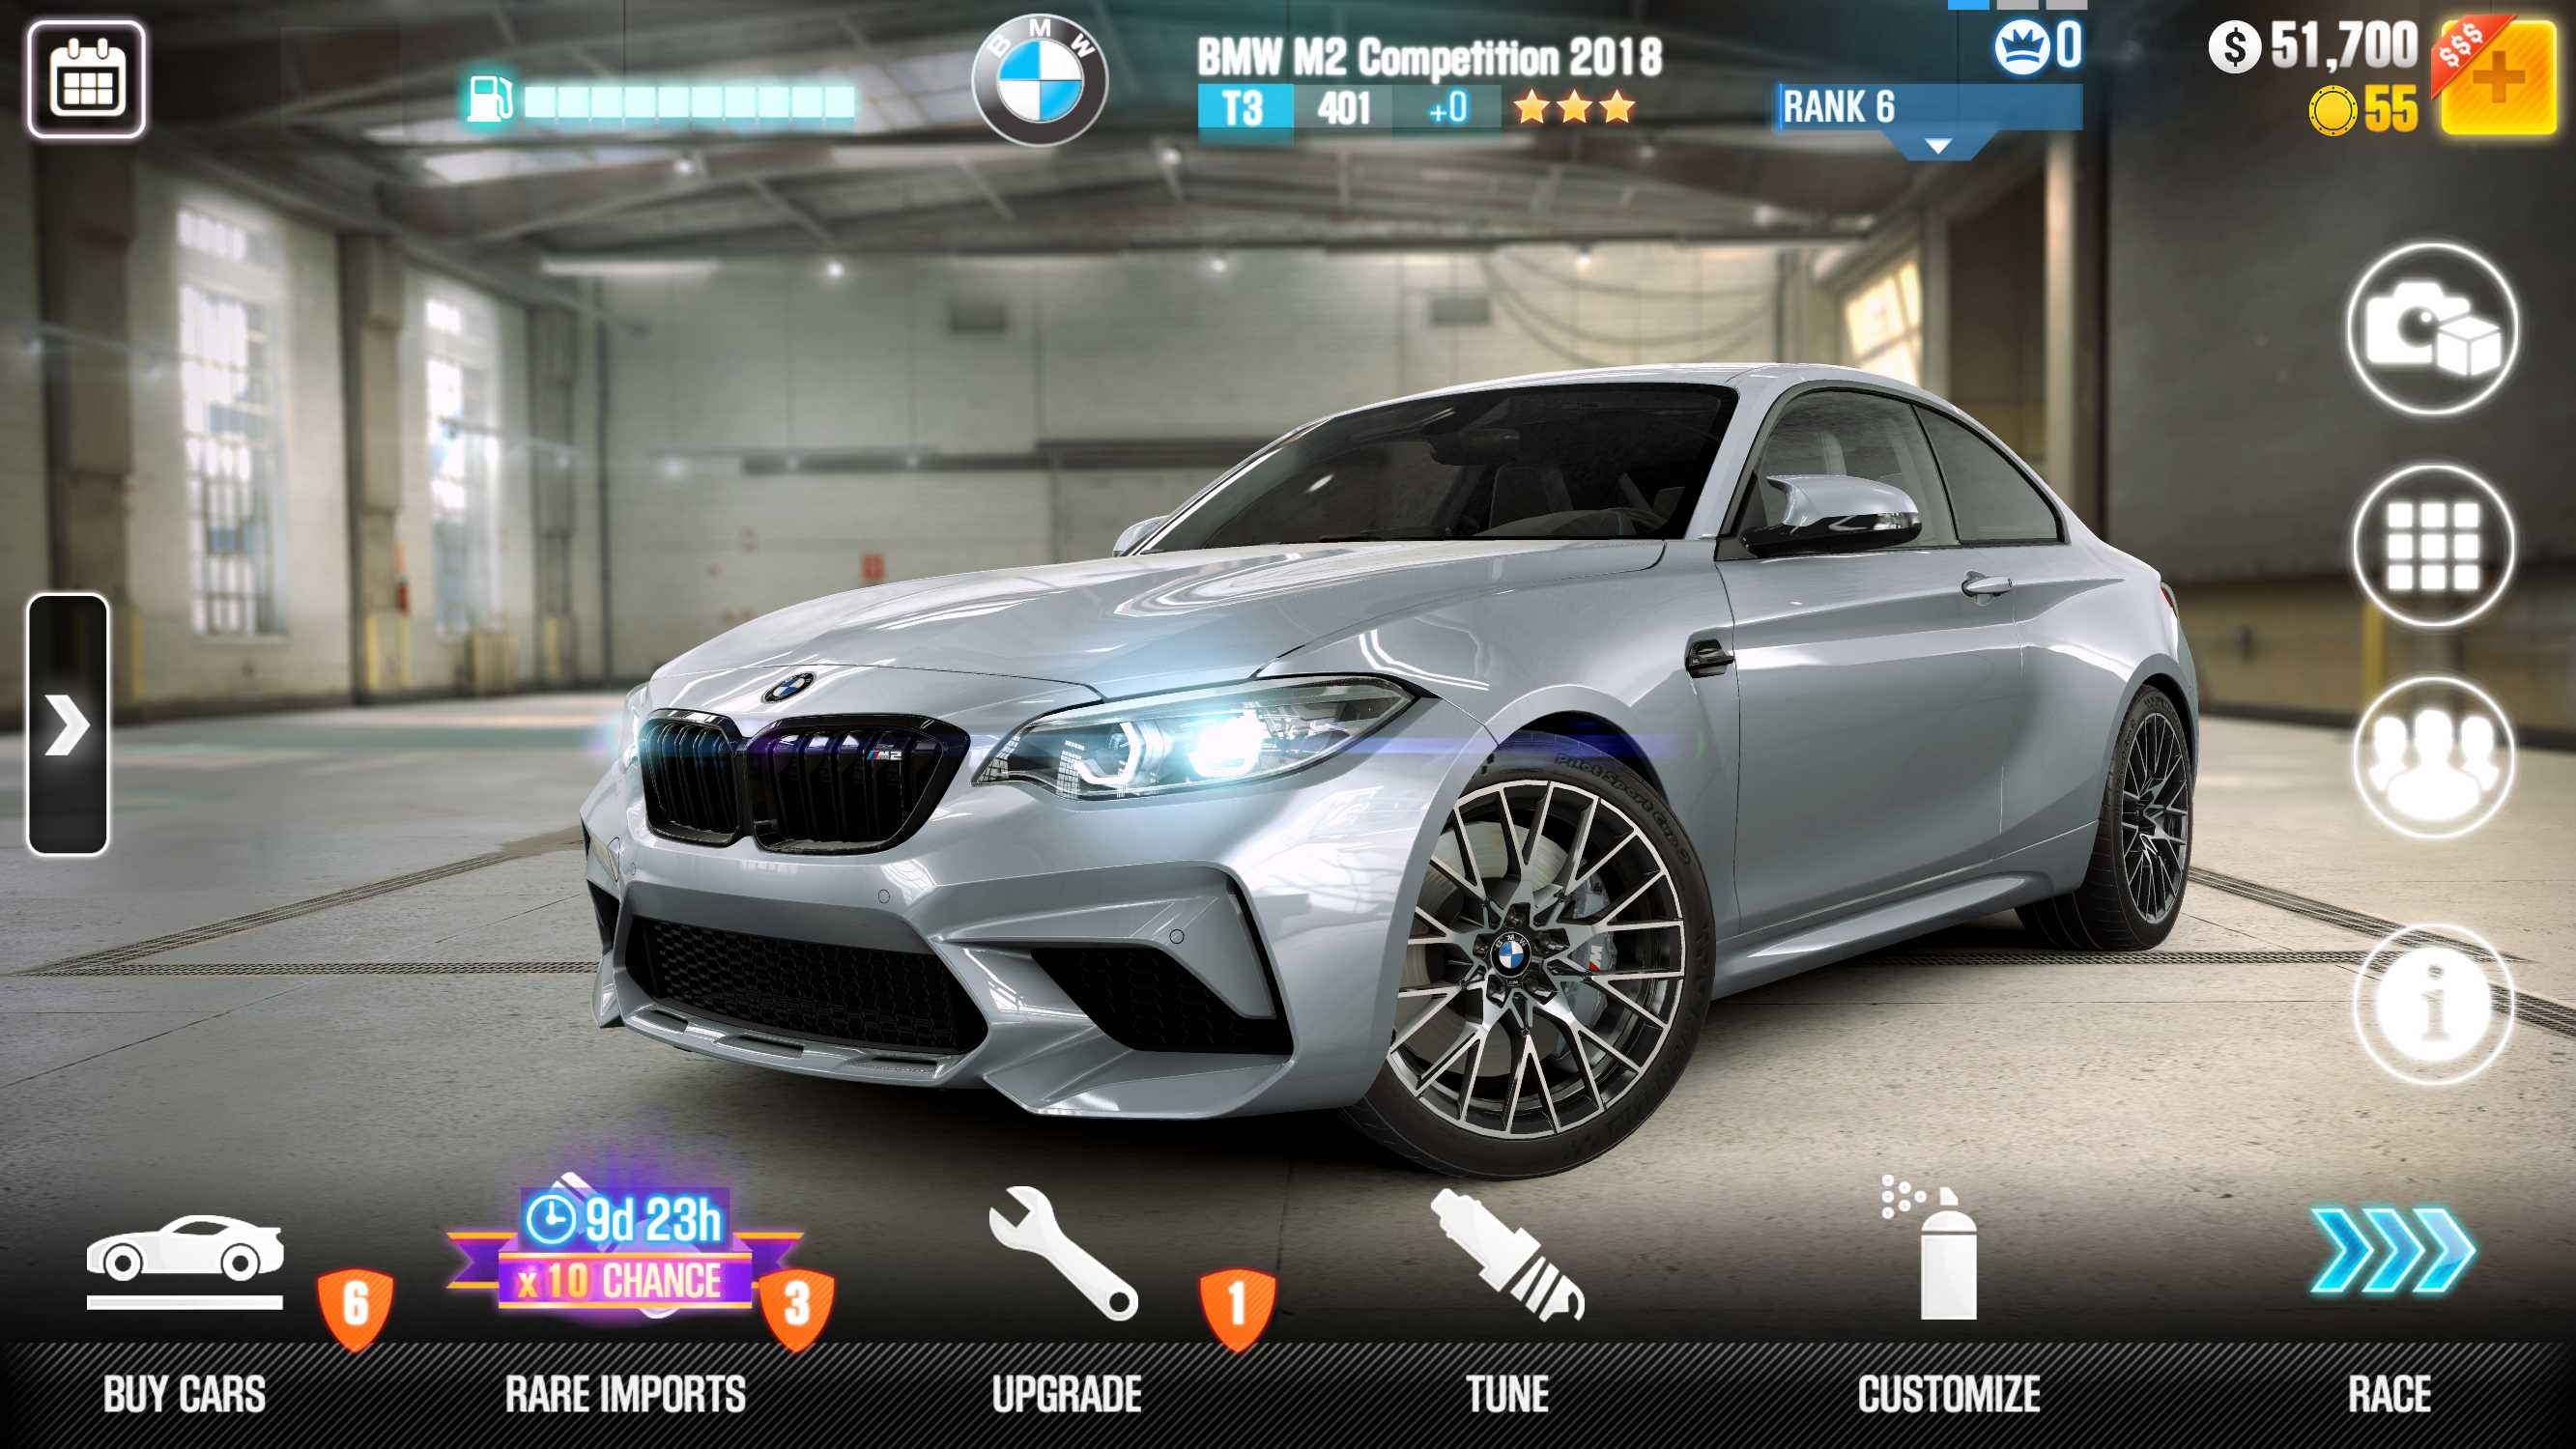 The new BMW M2 Competition in CSR Racing 2 from Zynga. In-game screenshot. (04/2018)